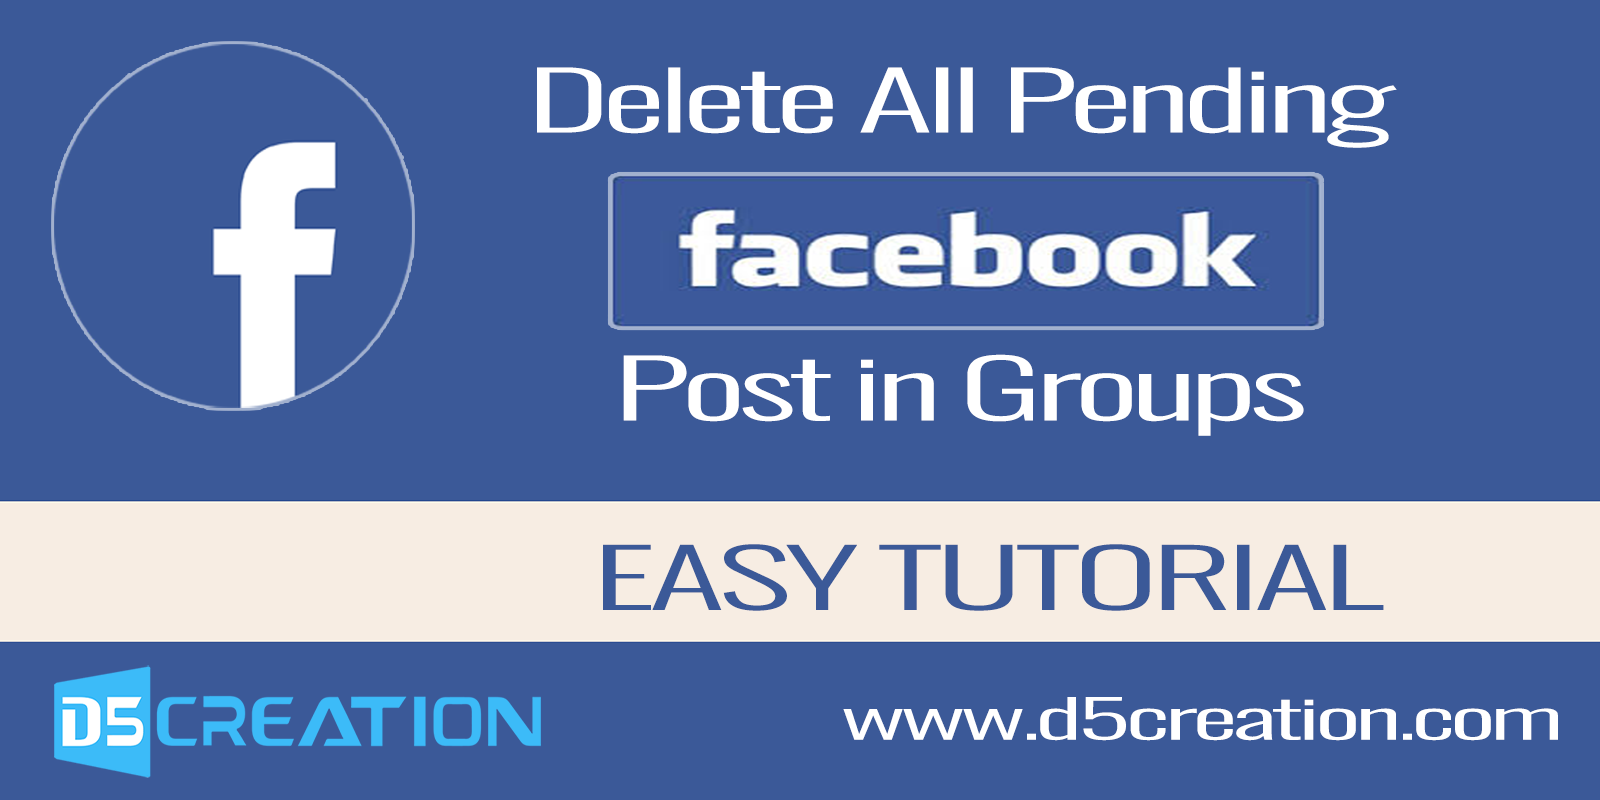 How to Delete All Pending Facebook Posts in Groups at Once - D29